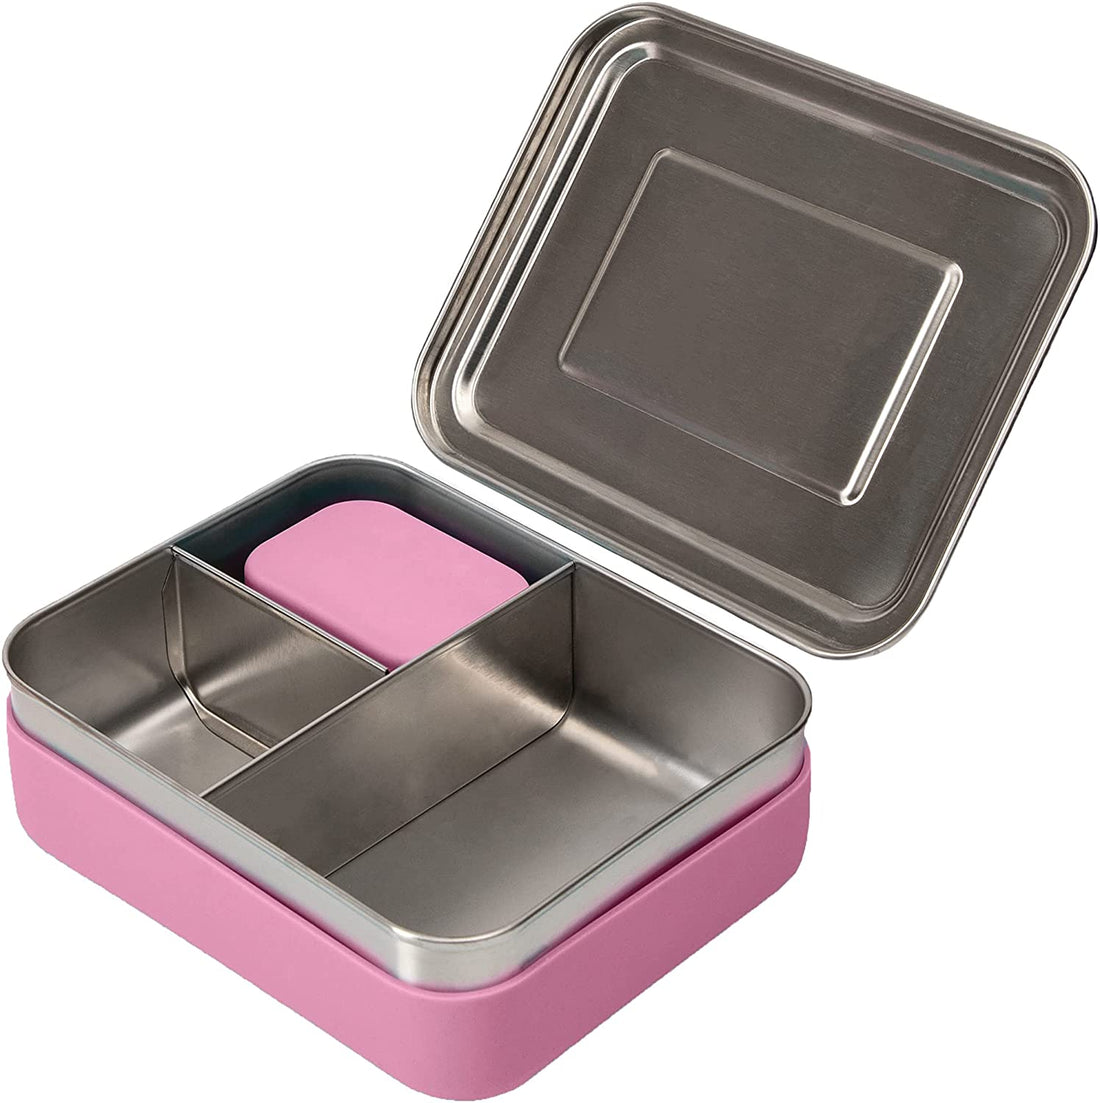 WeeSprout 18/8 Stainless Steel Bento Box (Compact Lunch Box) - 3 Compartment Metal Lunch Containers, for Kids & Adults, Bonus Dip Container, Fits in